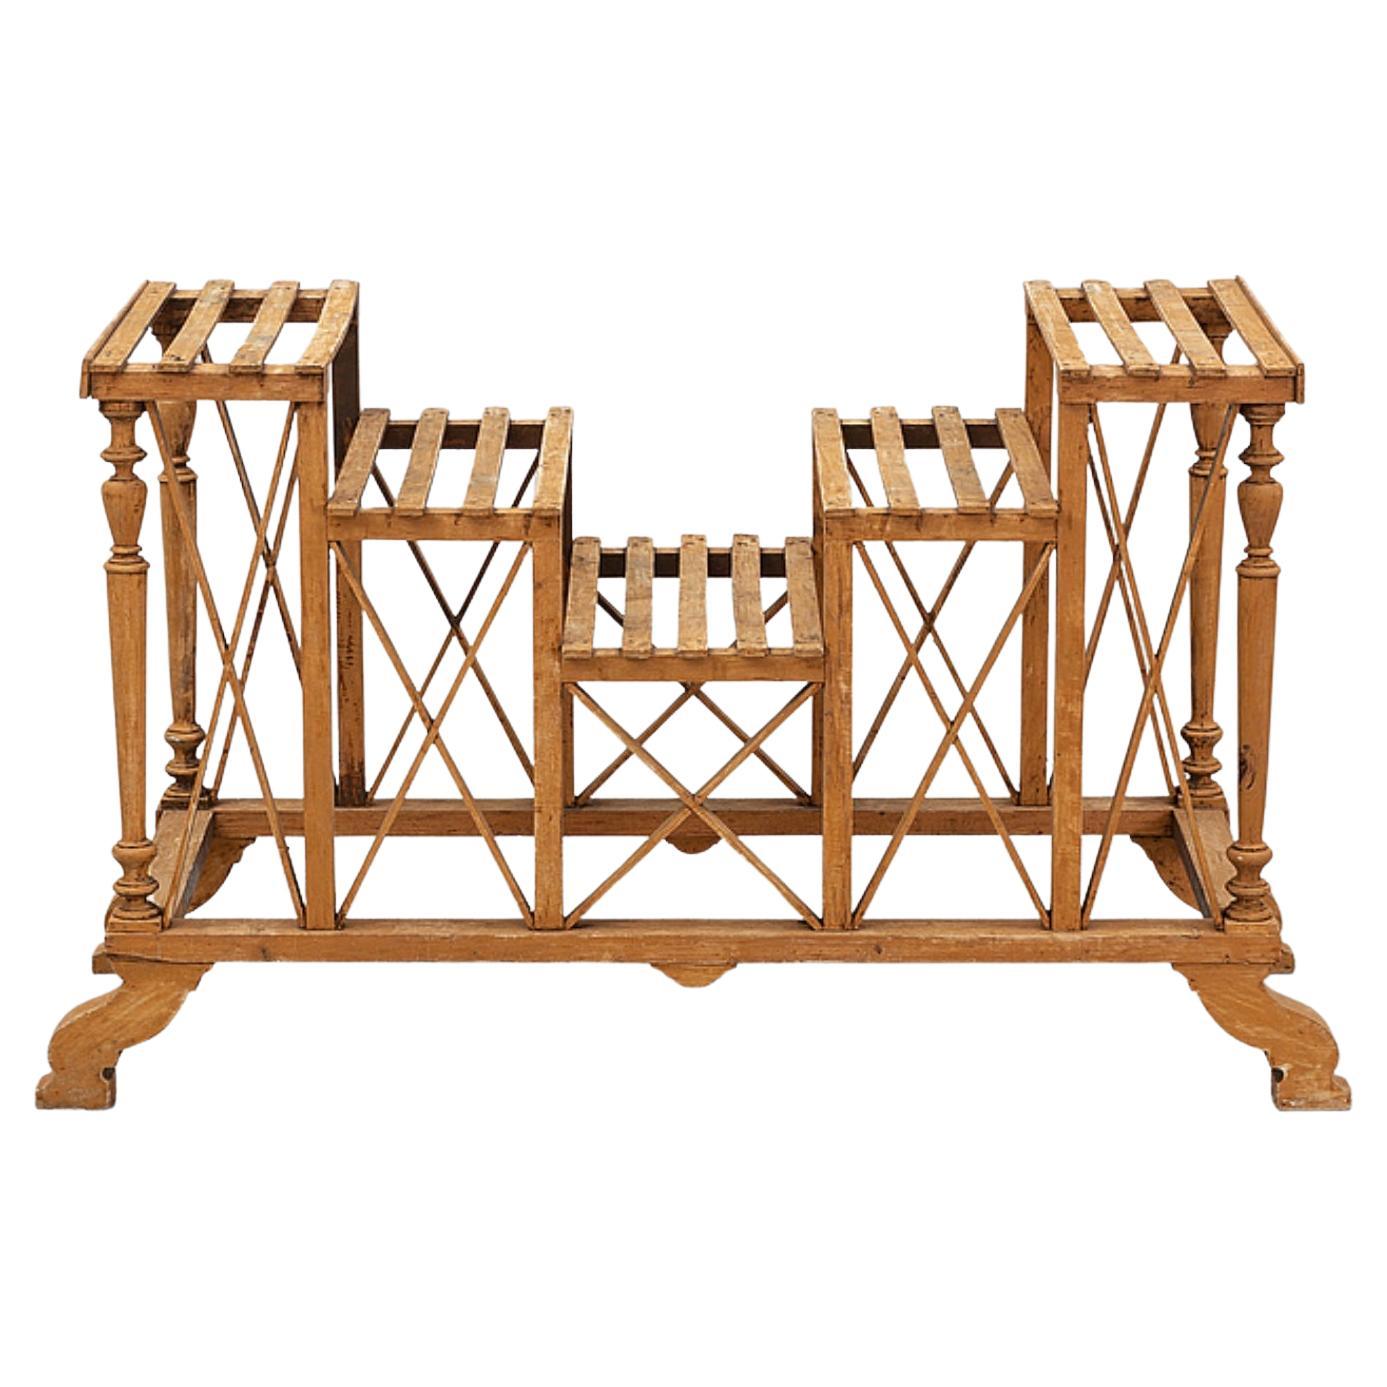 1900s Swedish Three-Tiered Wooden Flower Display Stand in the Style of Eiffel For Sale